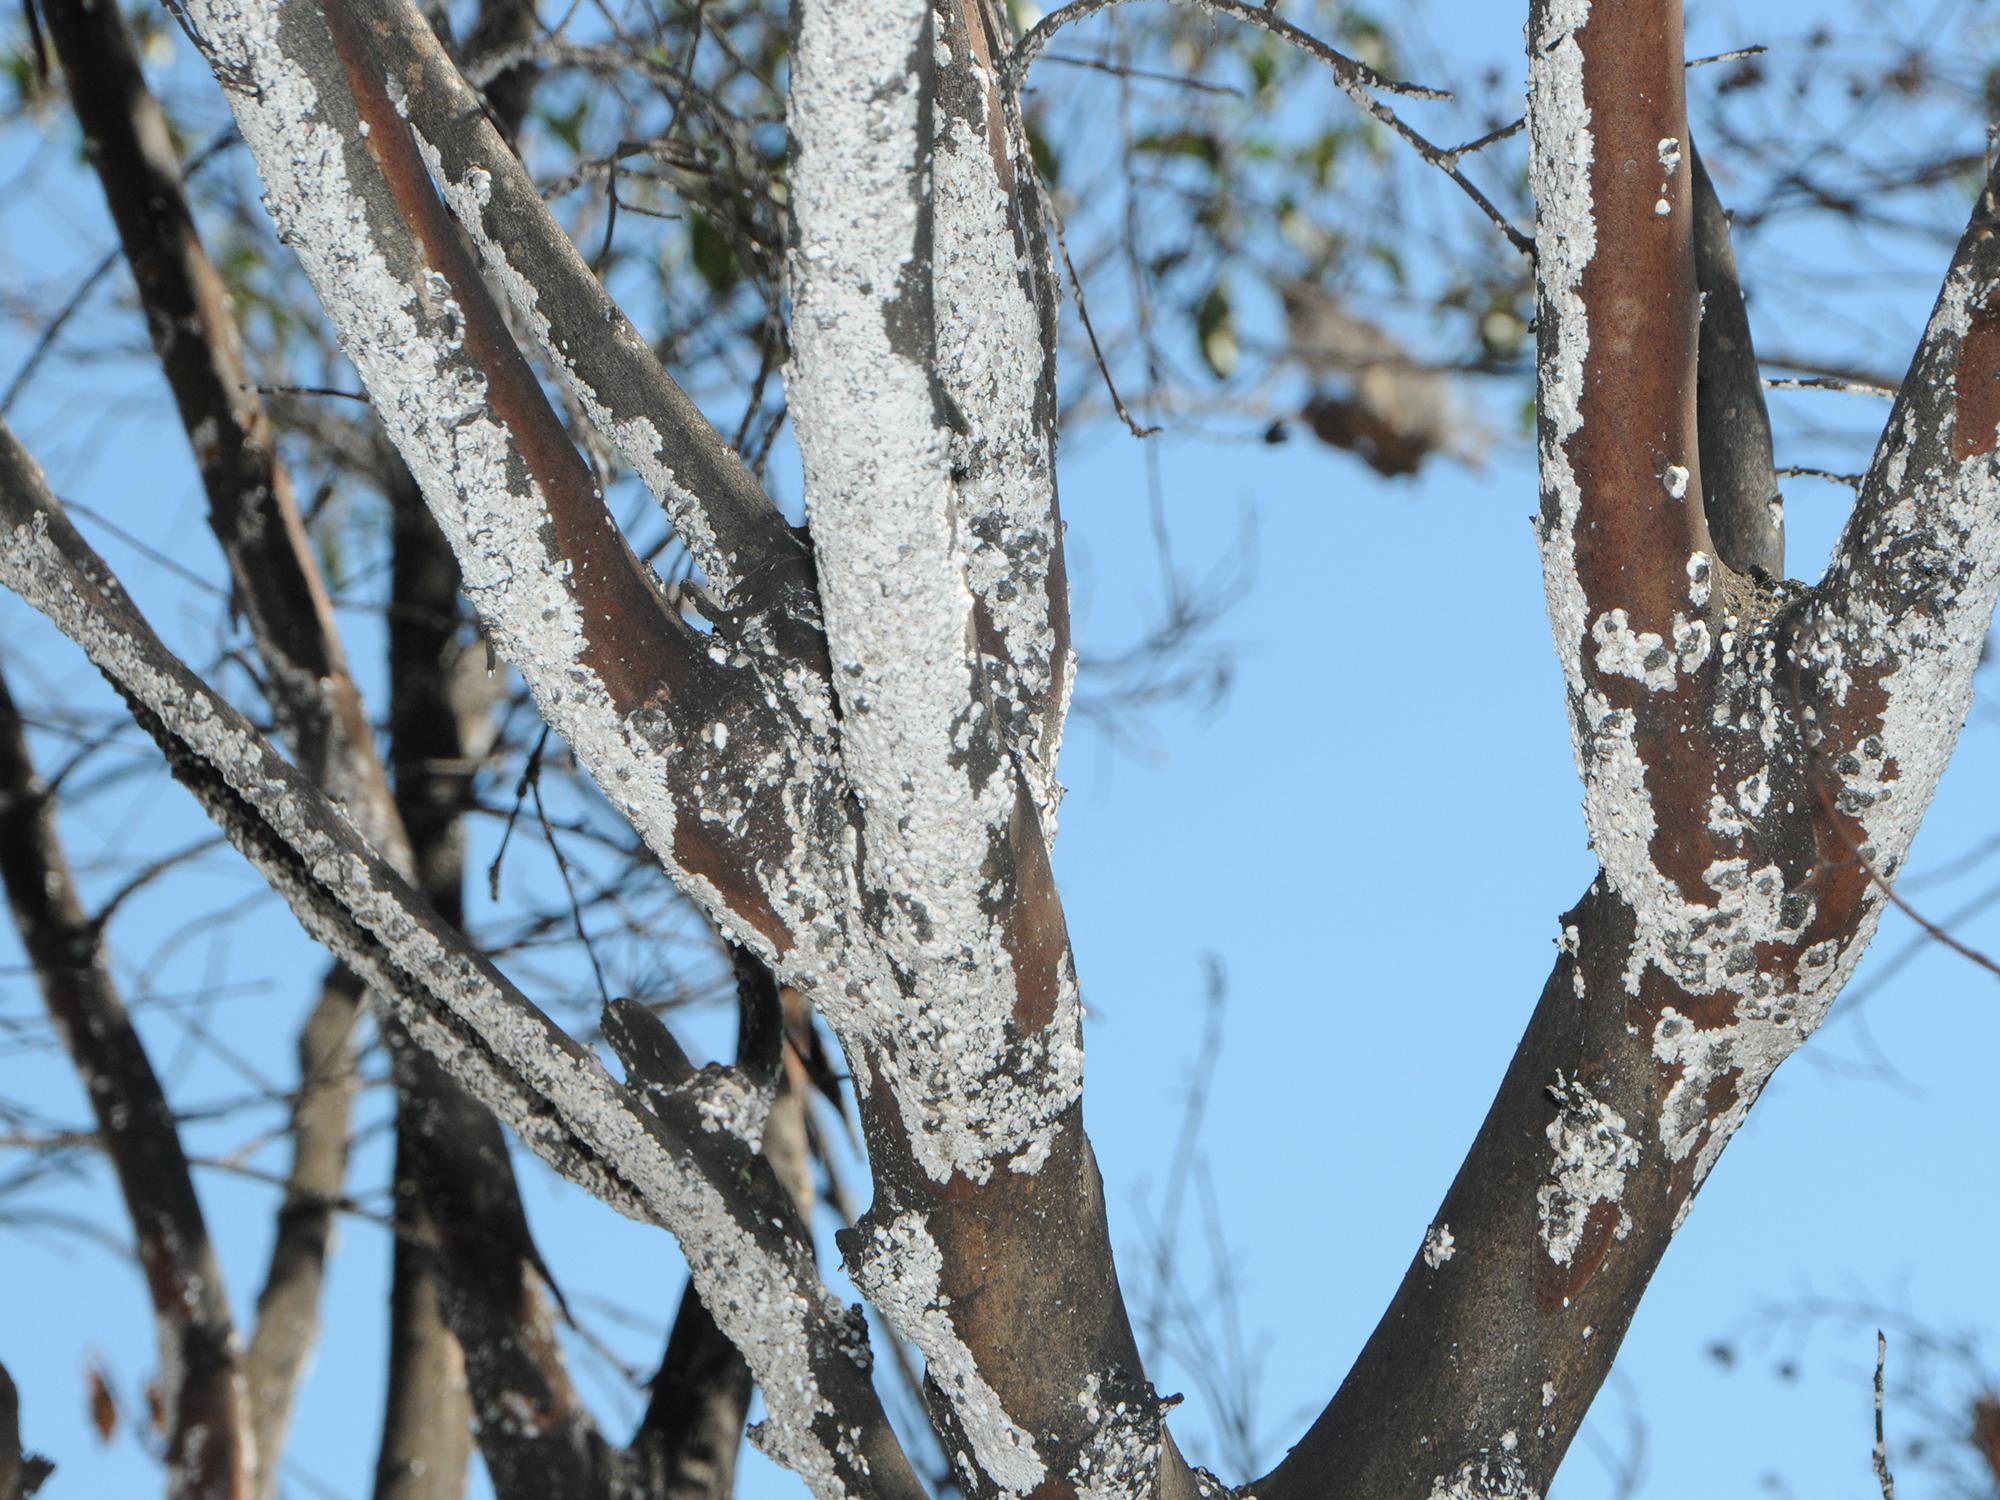 Large white patches appear on several branches of a crape myrtle tree.